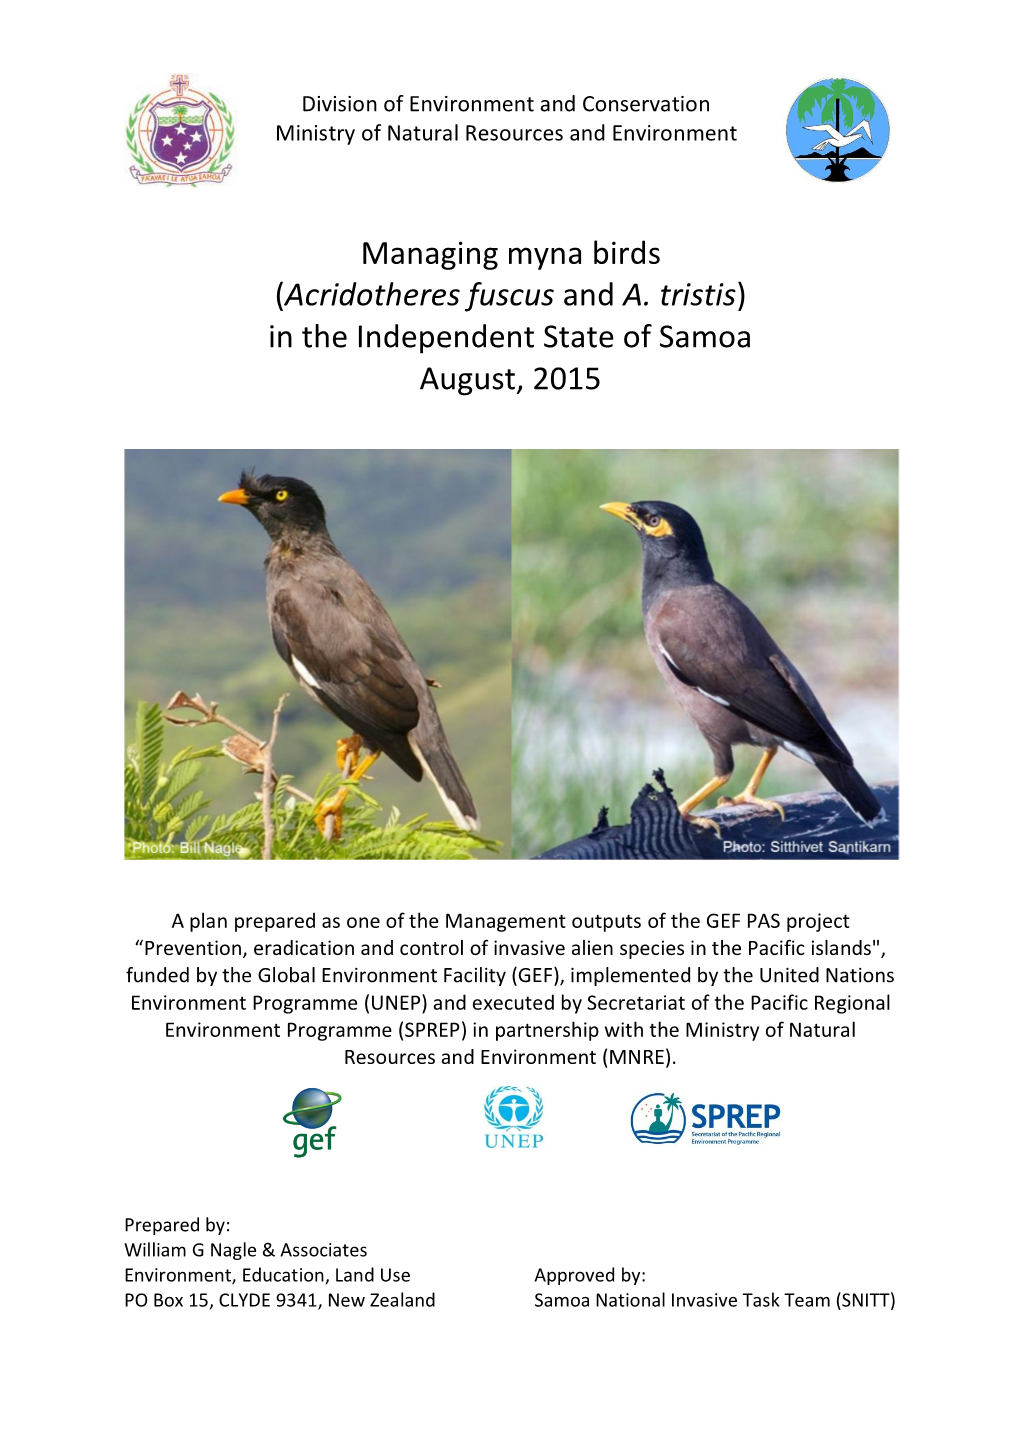 Managing Myna Birds (Acridotheres Fuscus and A. Tristis) in the Independent State of Samoa August, 2015